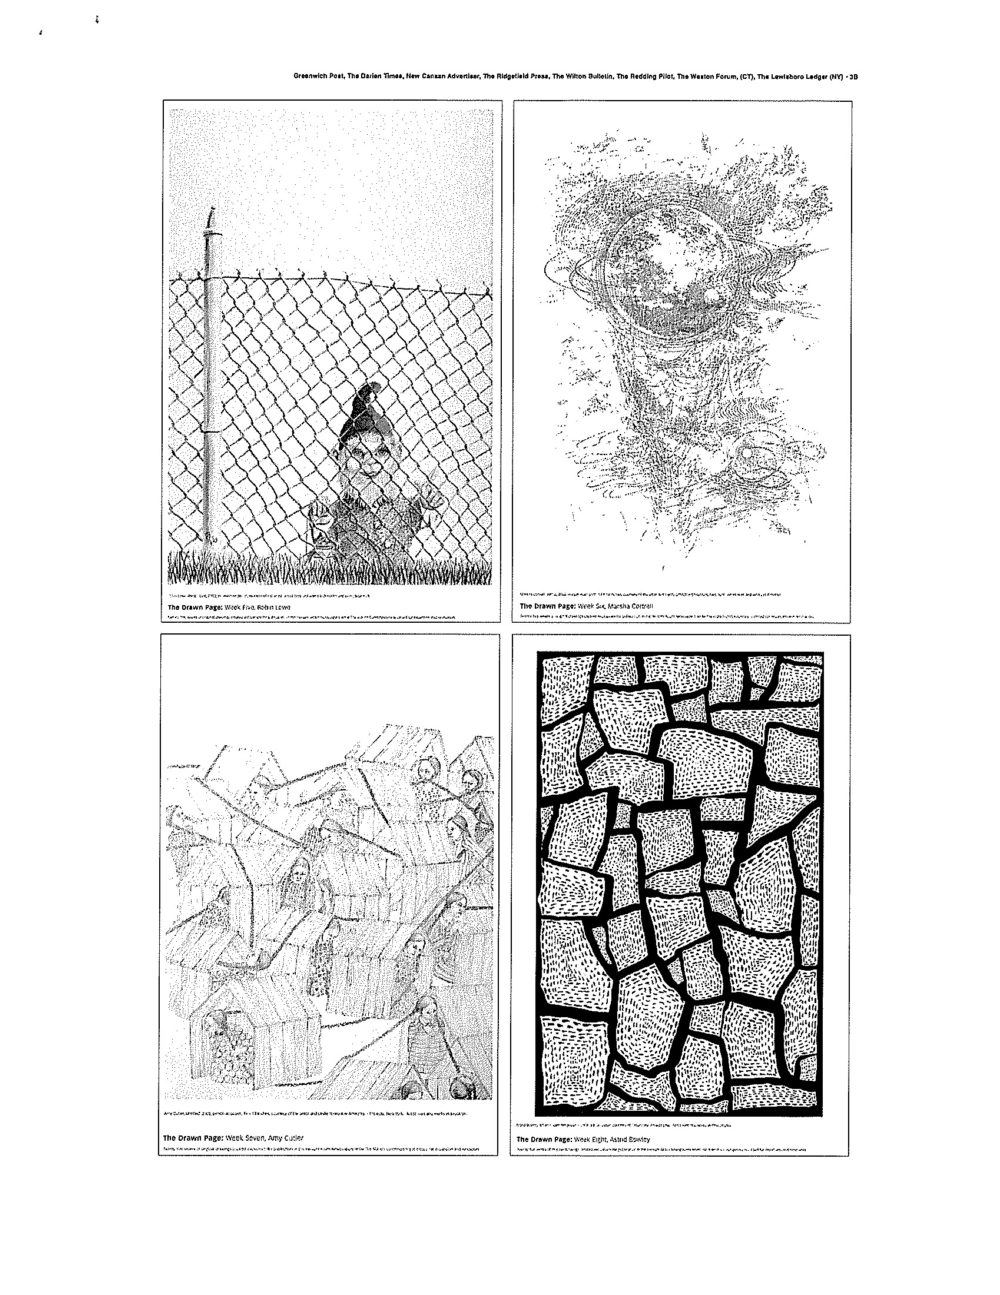 Black and white 2x2 grid of images as printed in newspapers